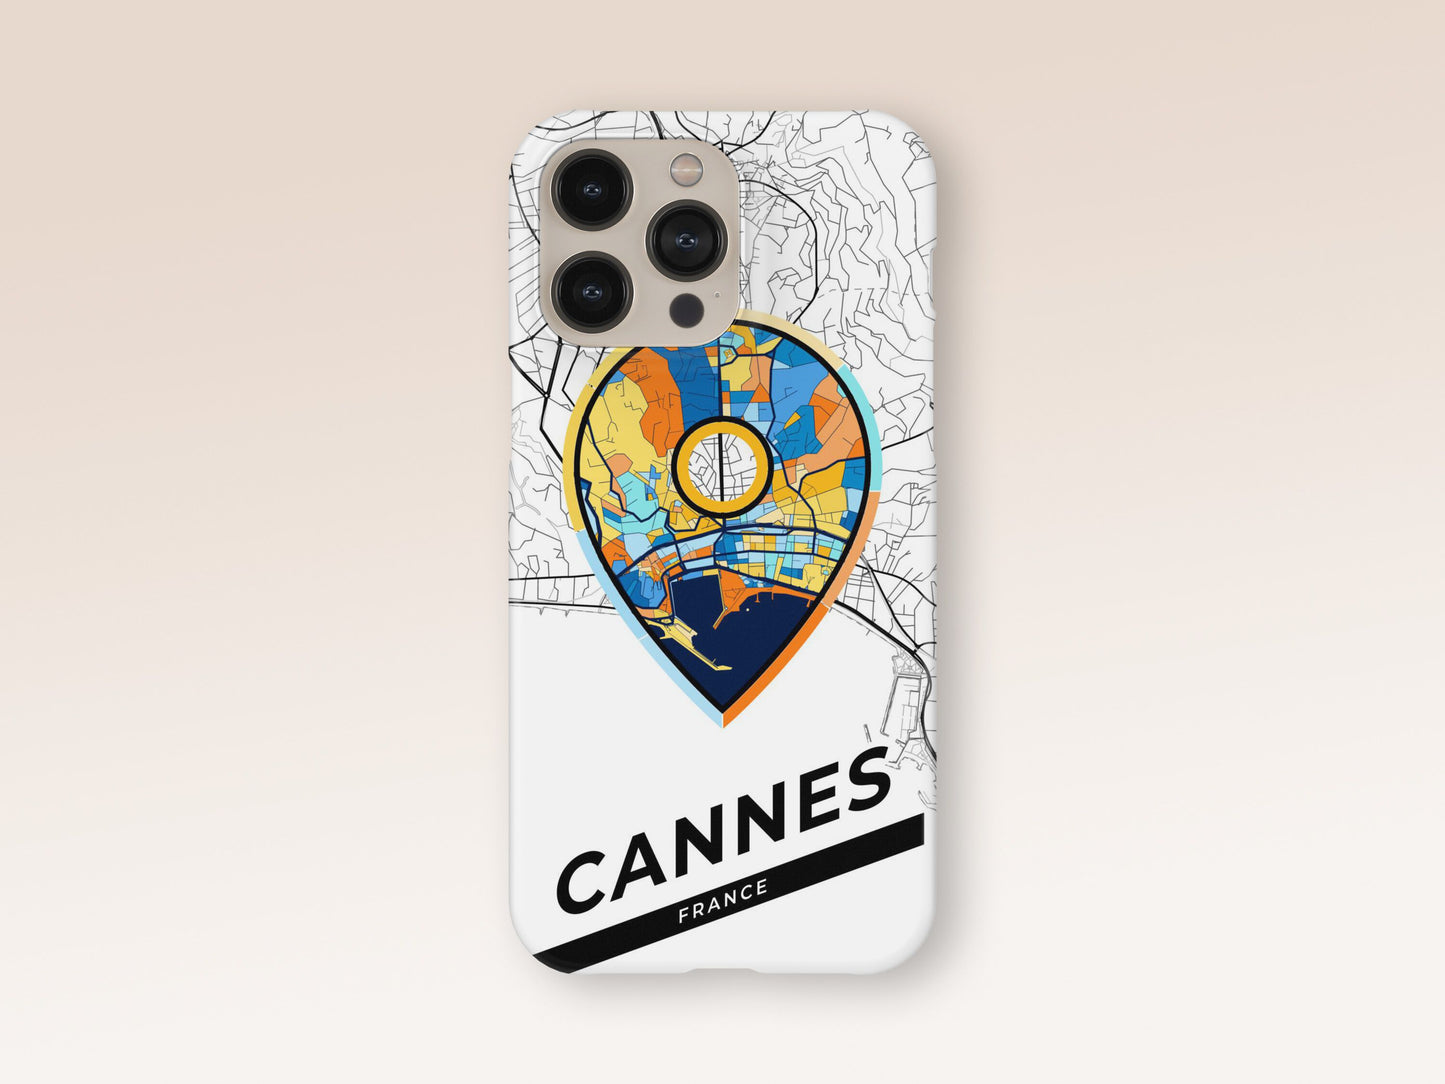 Cannes France slim phone case with colorful icon. Birthday, wedding or housewarming gift. Couple match cases. 1